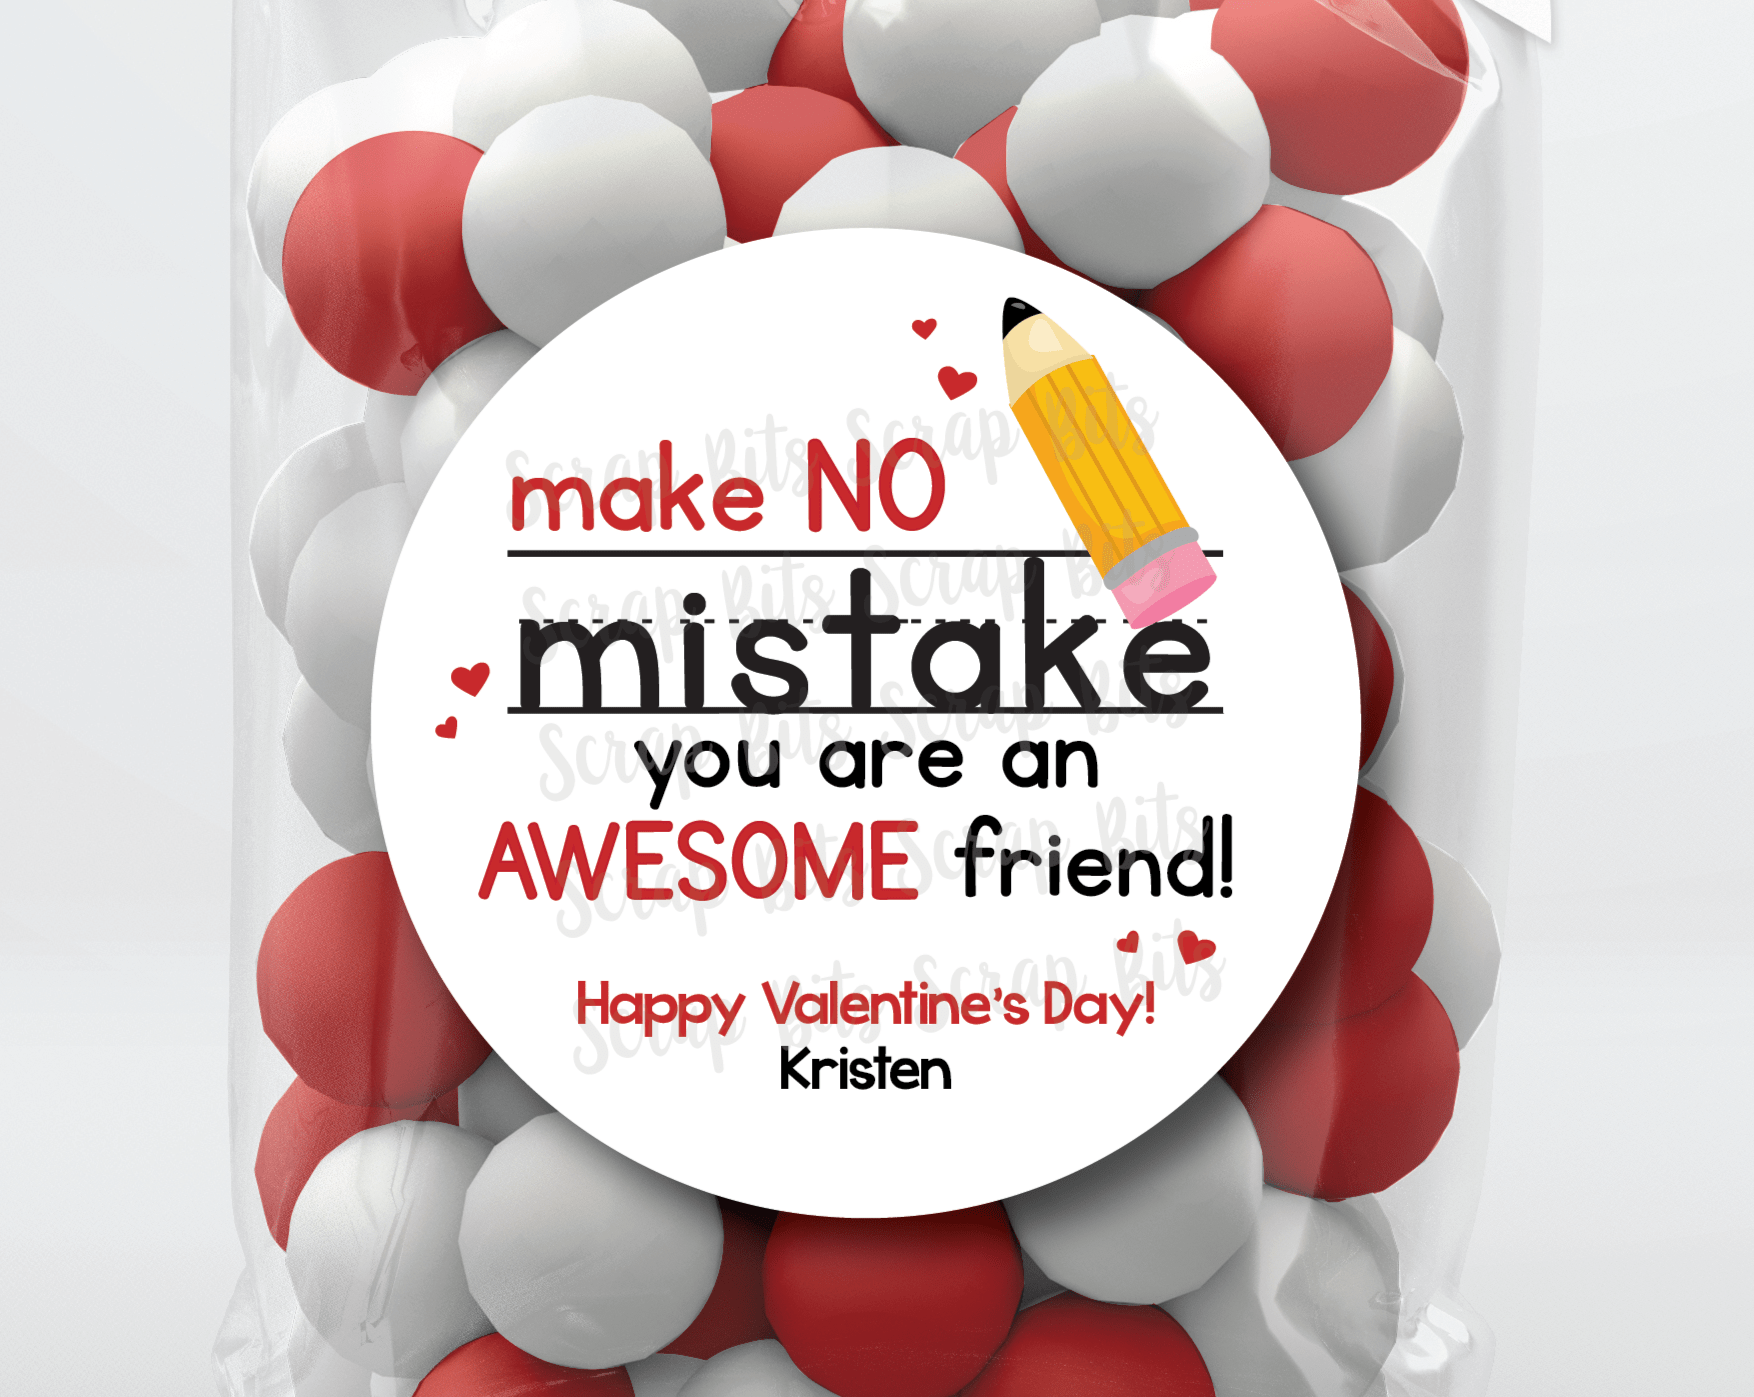 Make No Mistake About It . Friend School Pencil Valentine's Day Stickers or Tags - Scrap Bits